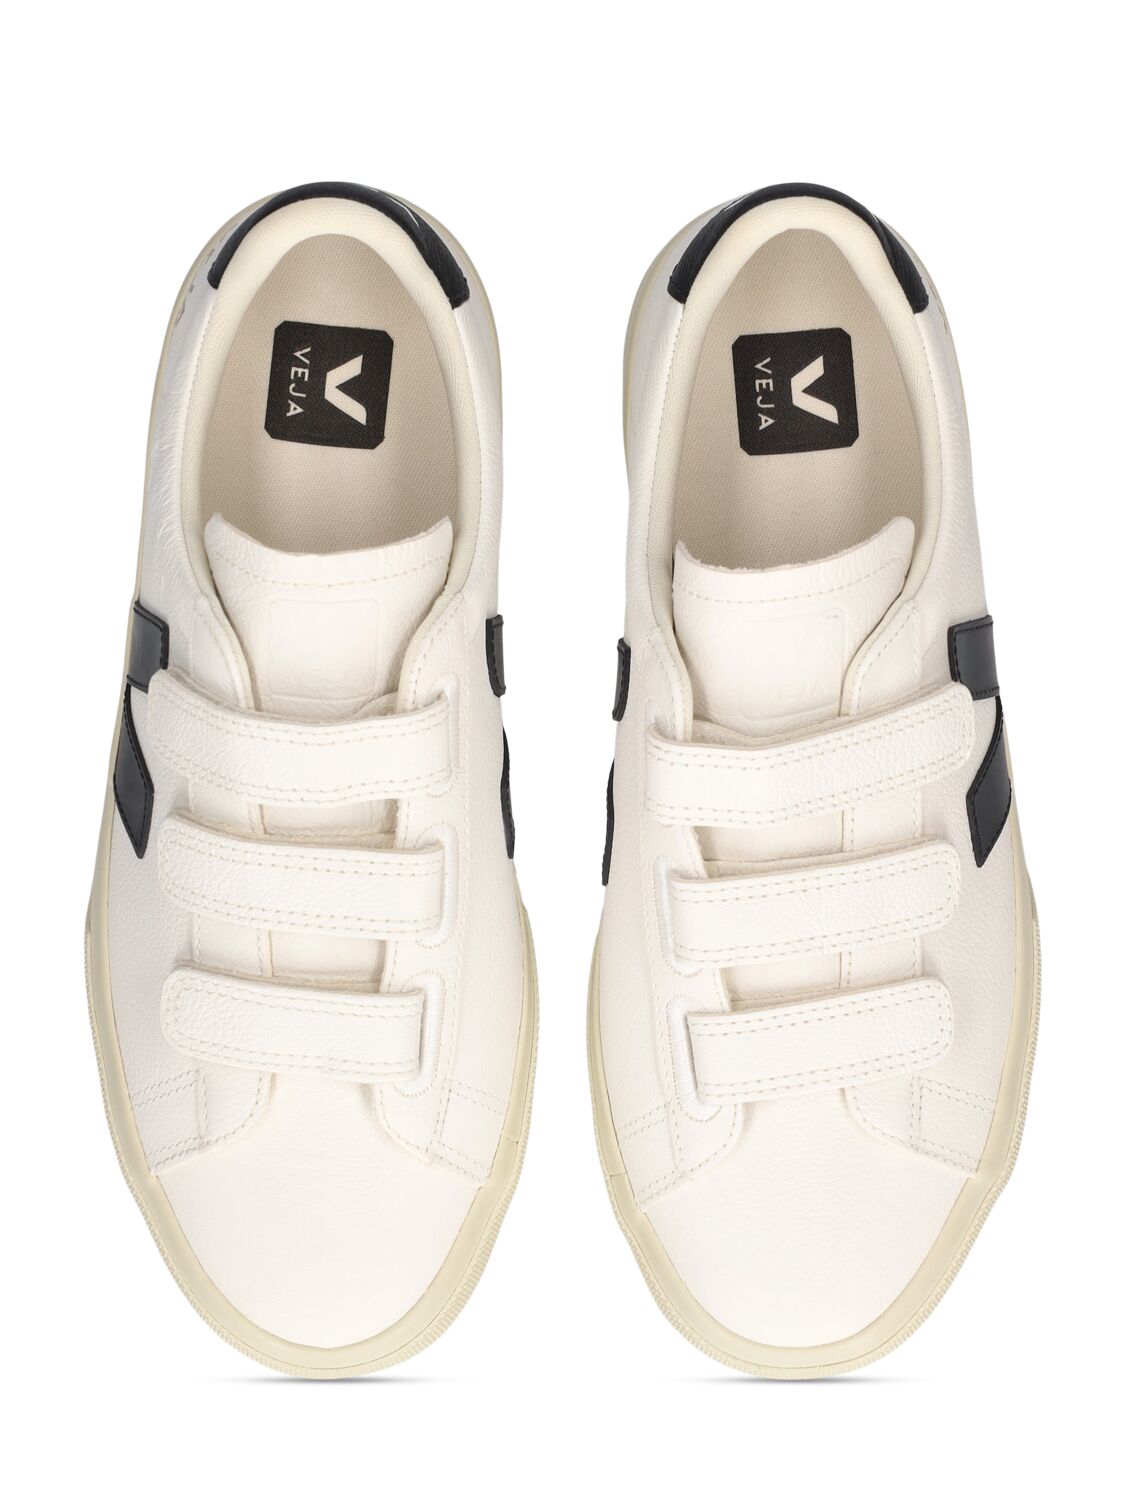 Shop Veja Recife Leather Sneakers In White